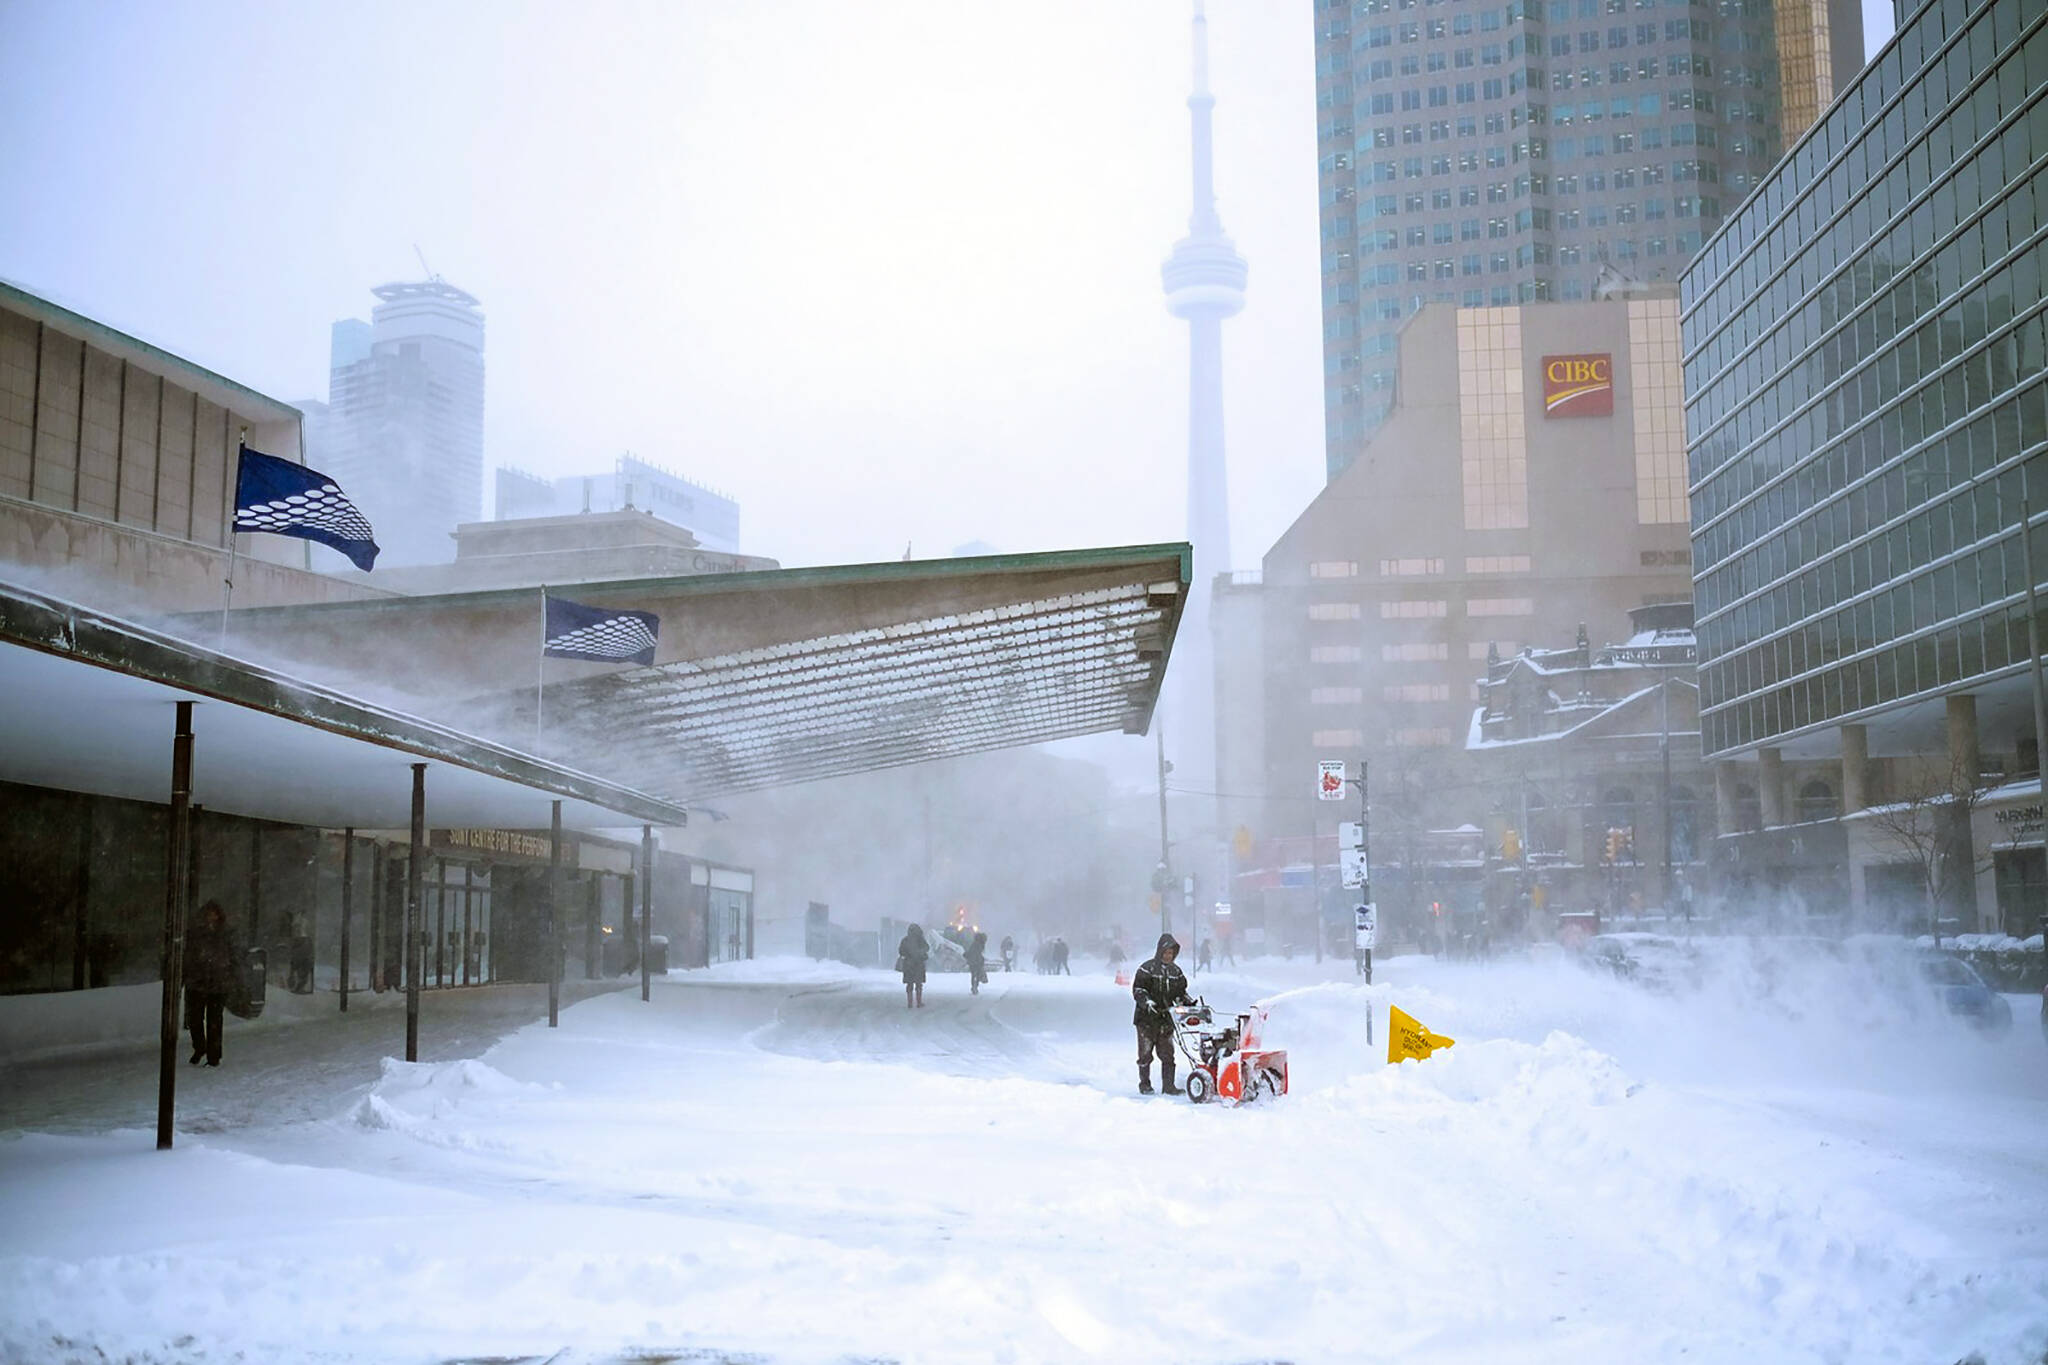 Toronto's extended winter weather forecast just dropped and it's a doozy